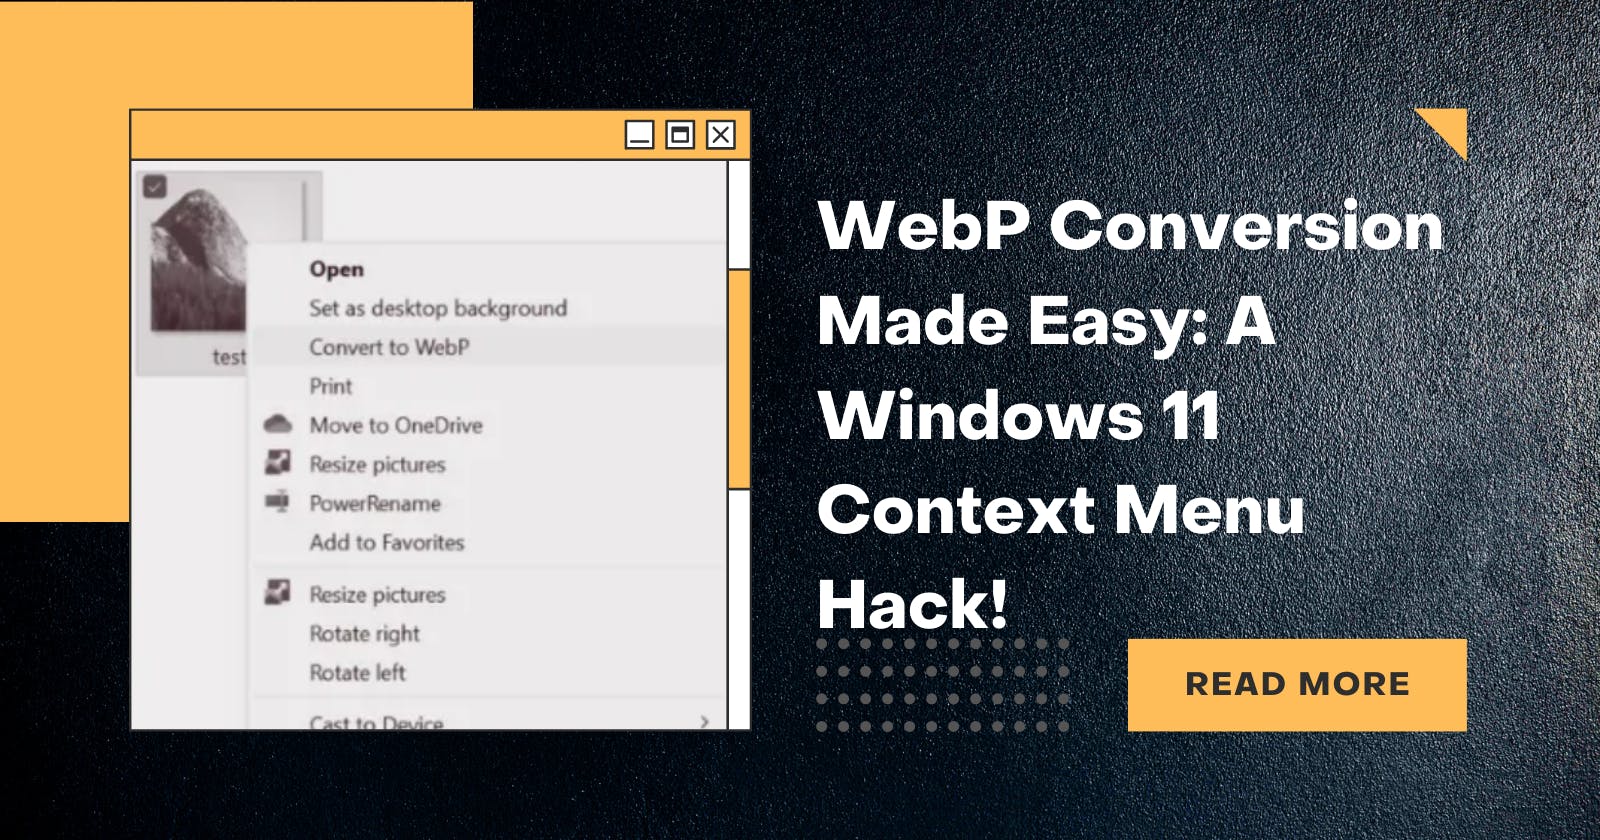 WebP Conversion Made Easy